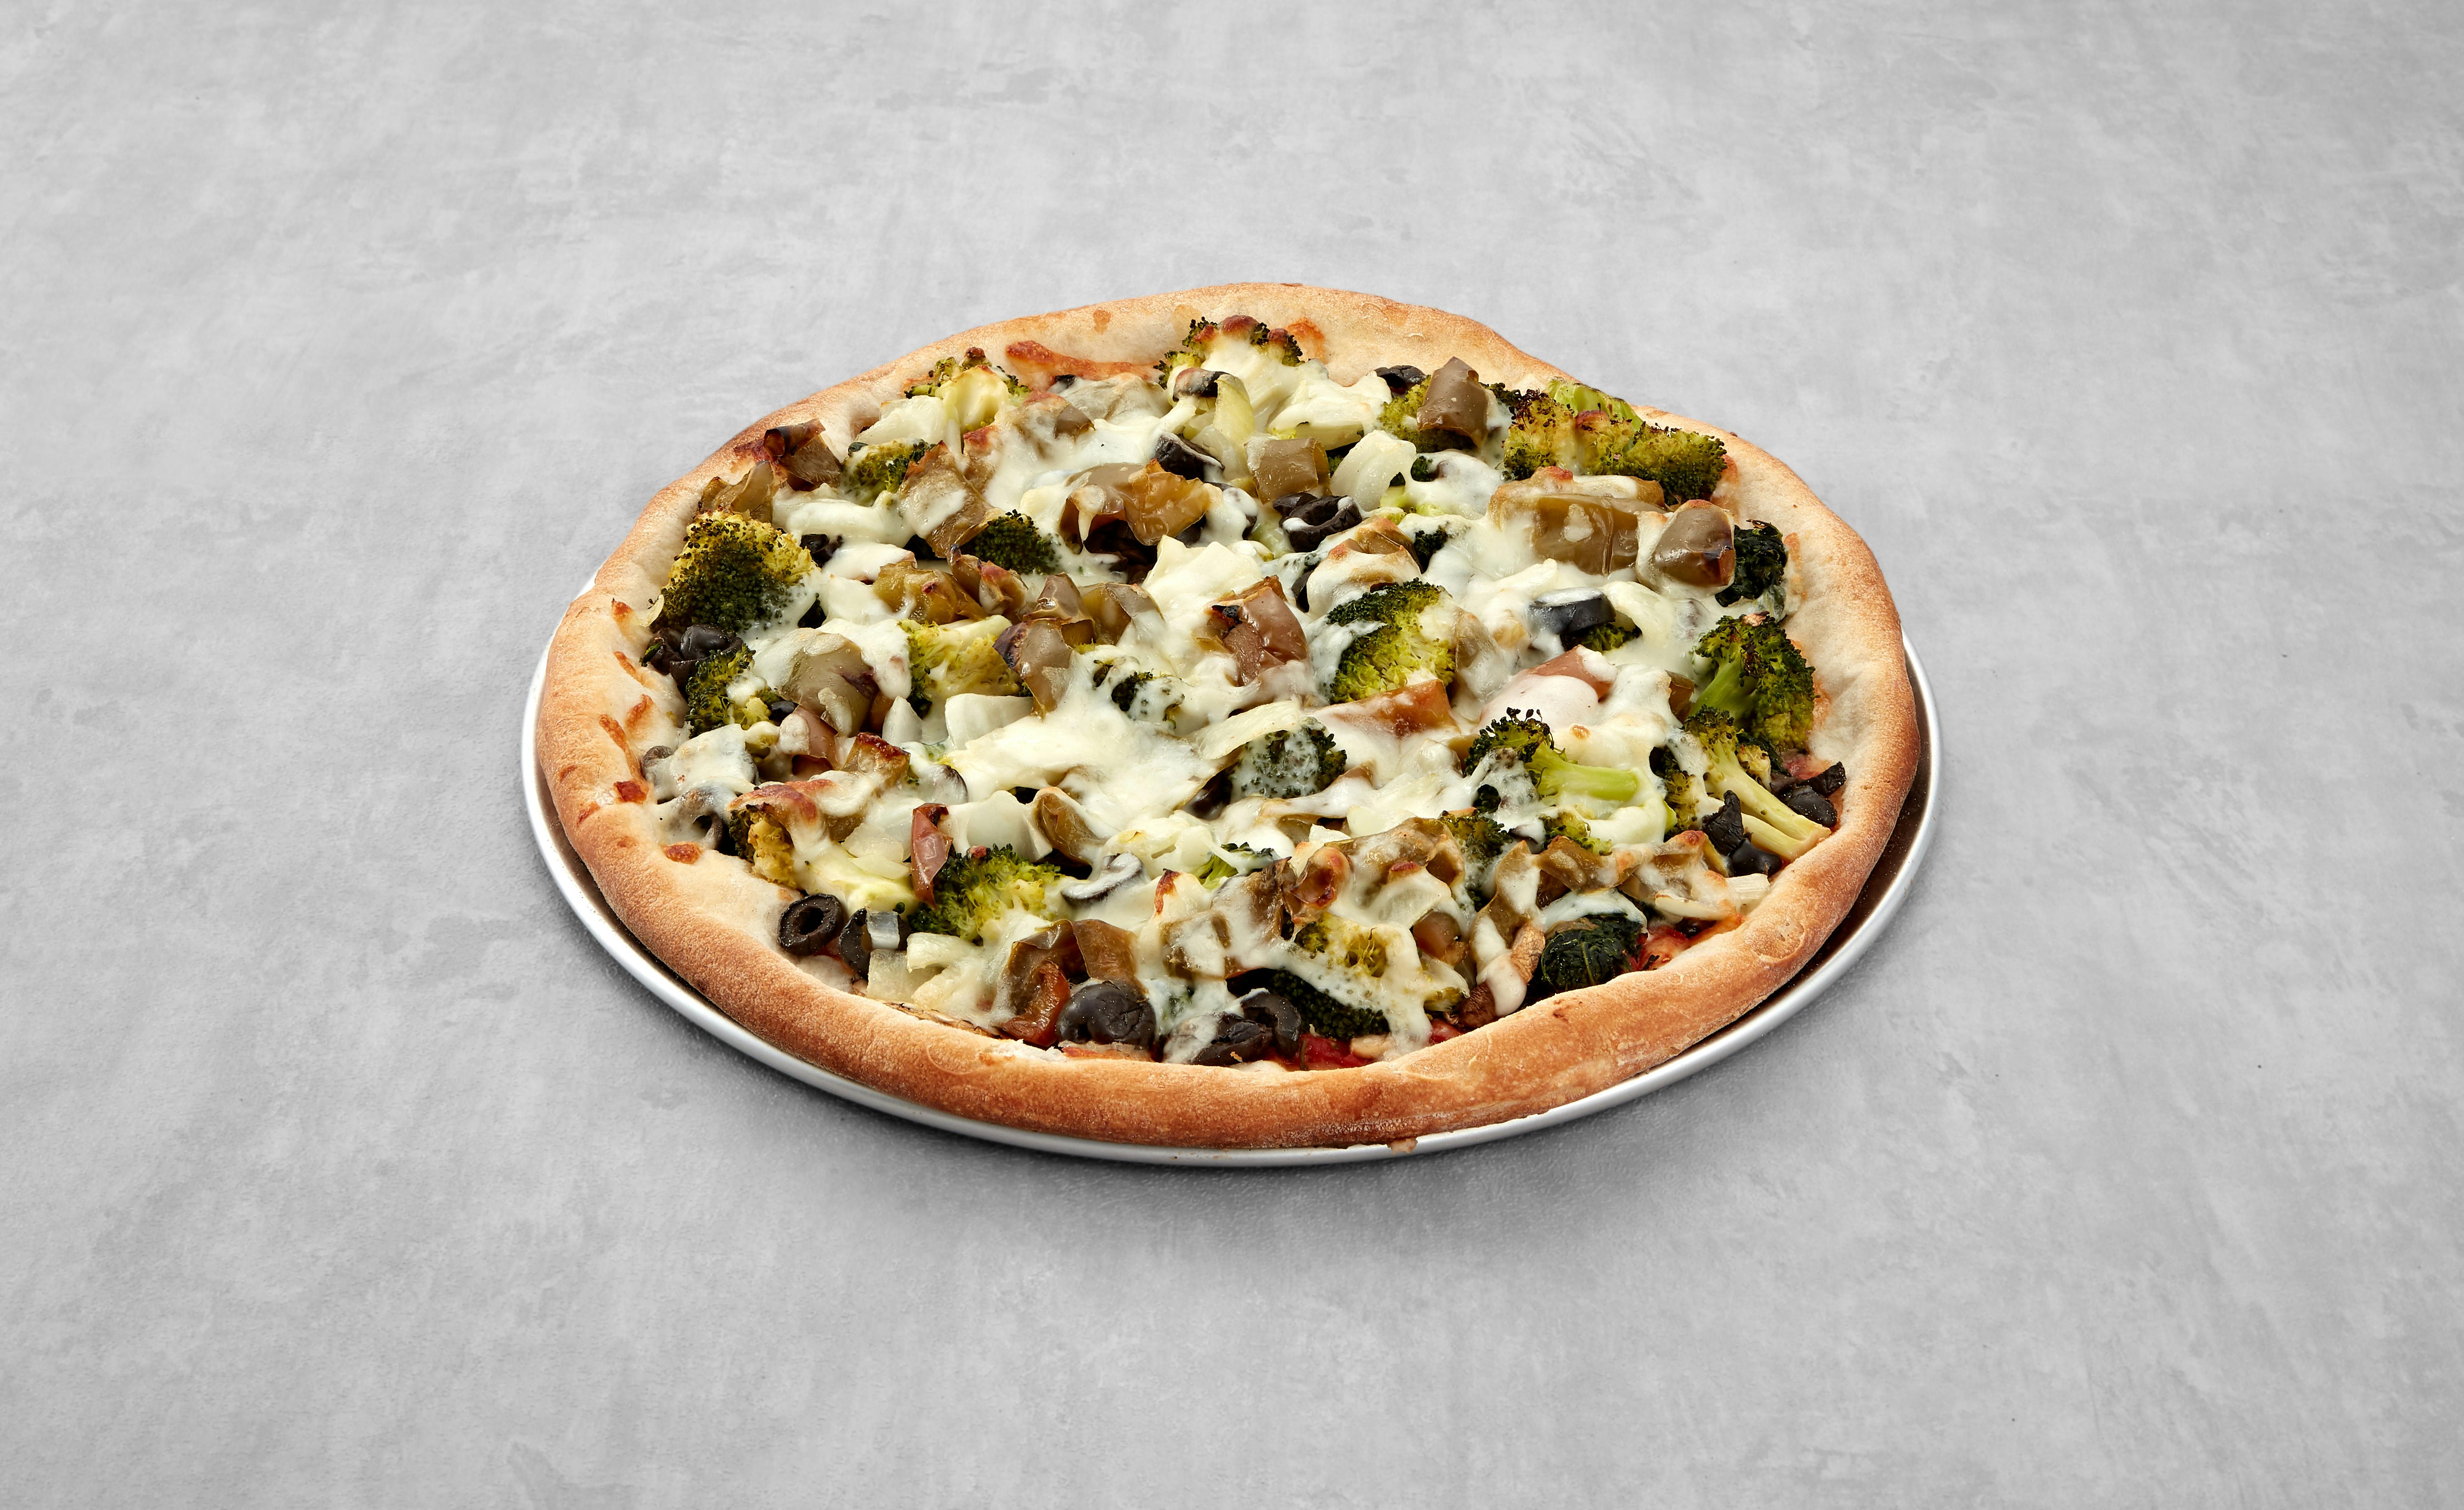 Vegetable Pizza Personal from Mario's Pizzeria in Seaford, NY